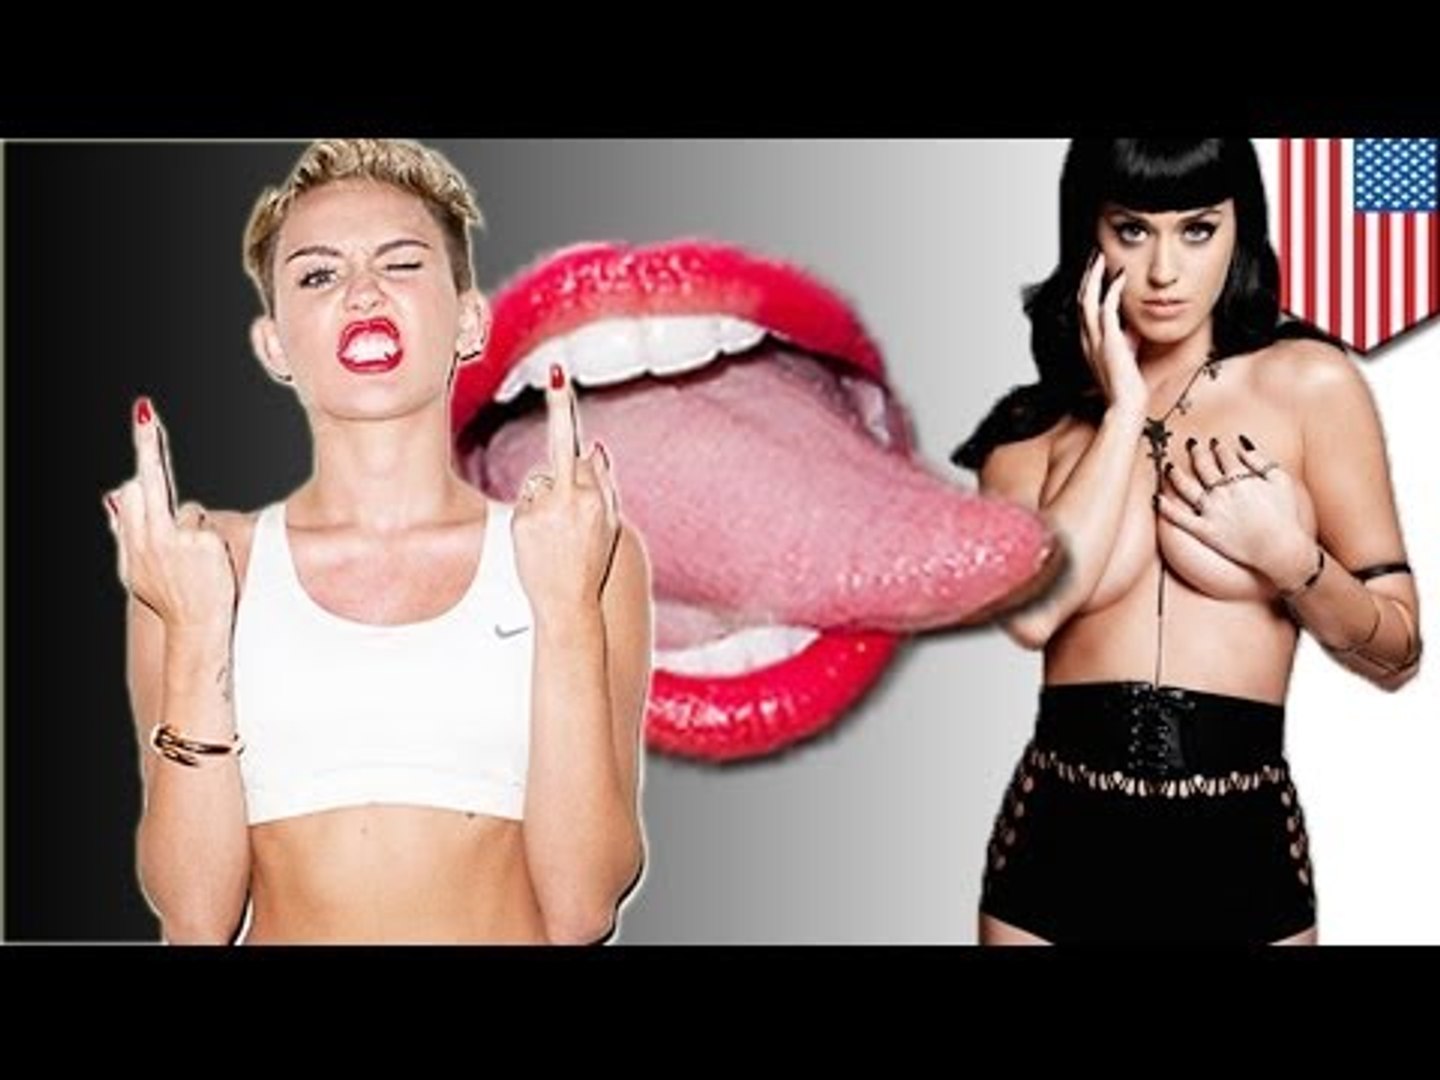 Katy Perry blasts Miley Cyrus kiss, Miley takes to Twitter